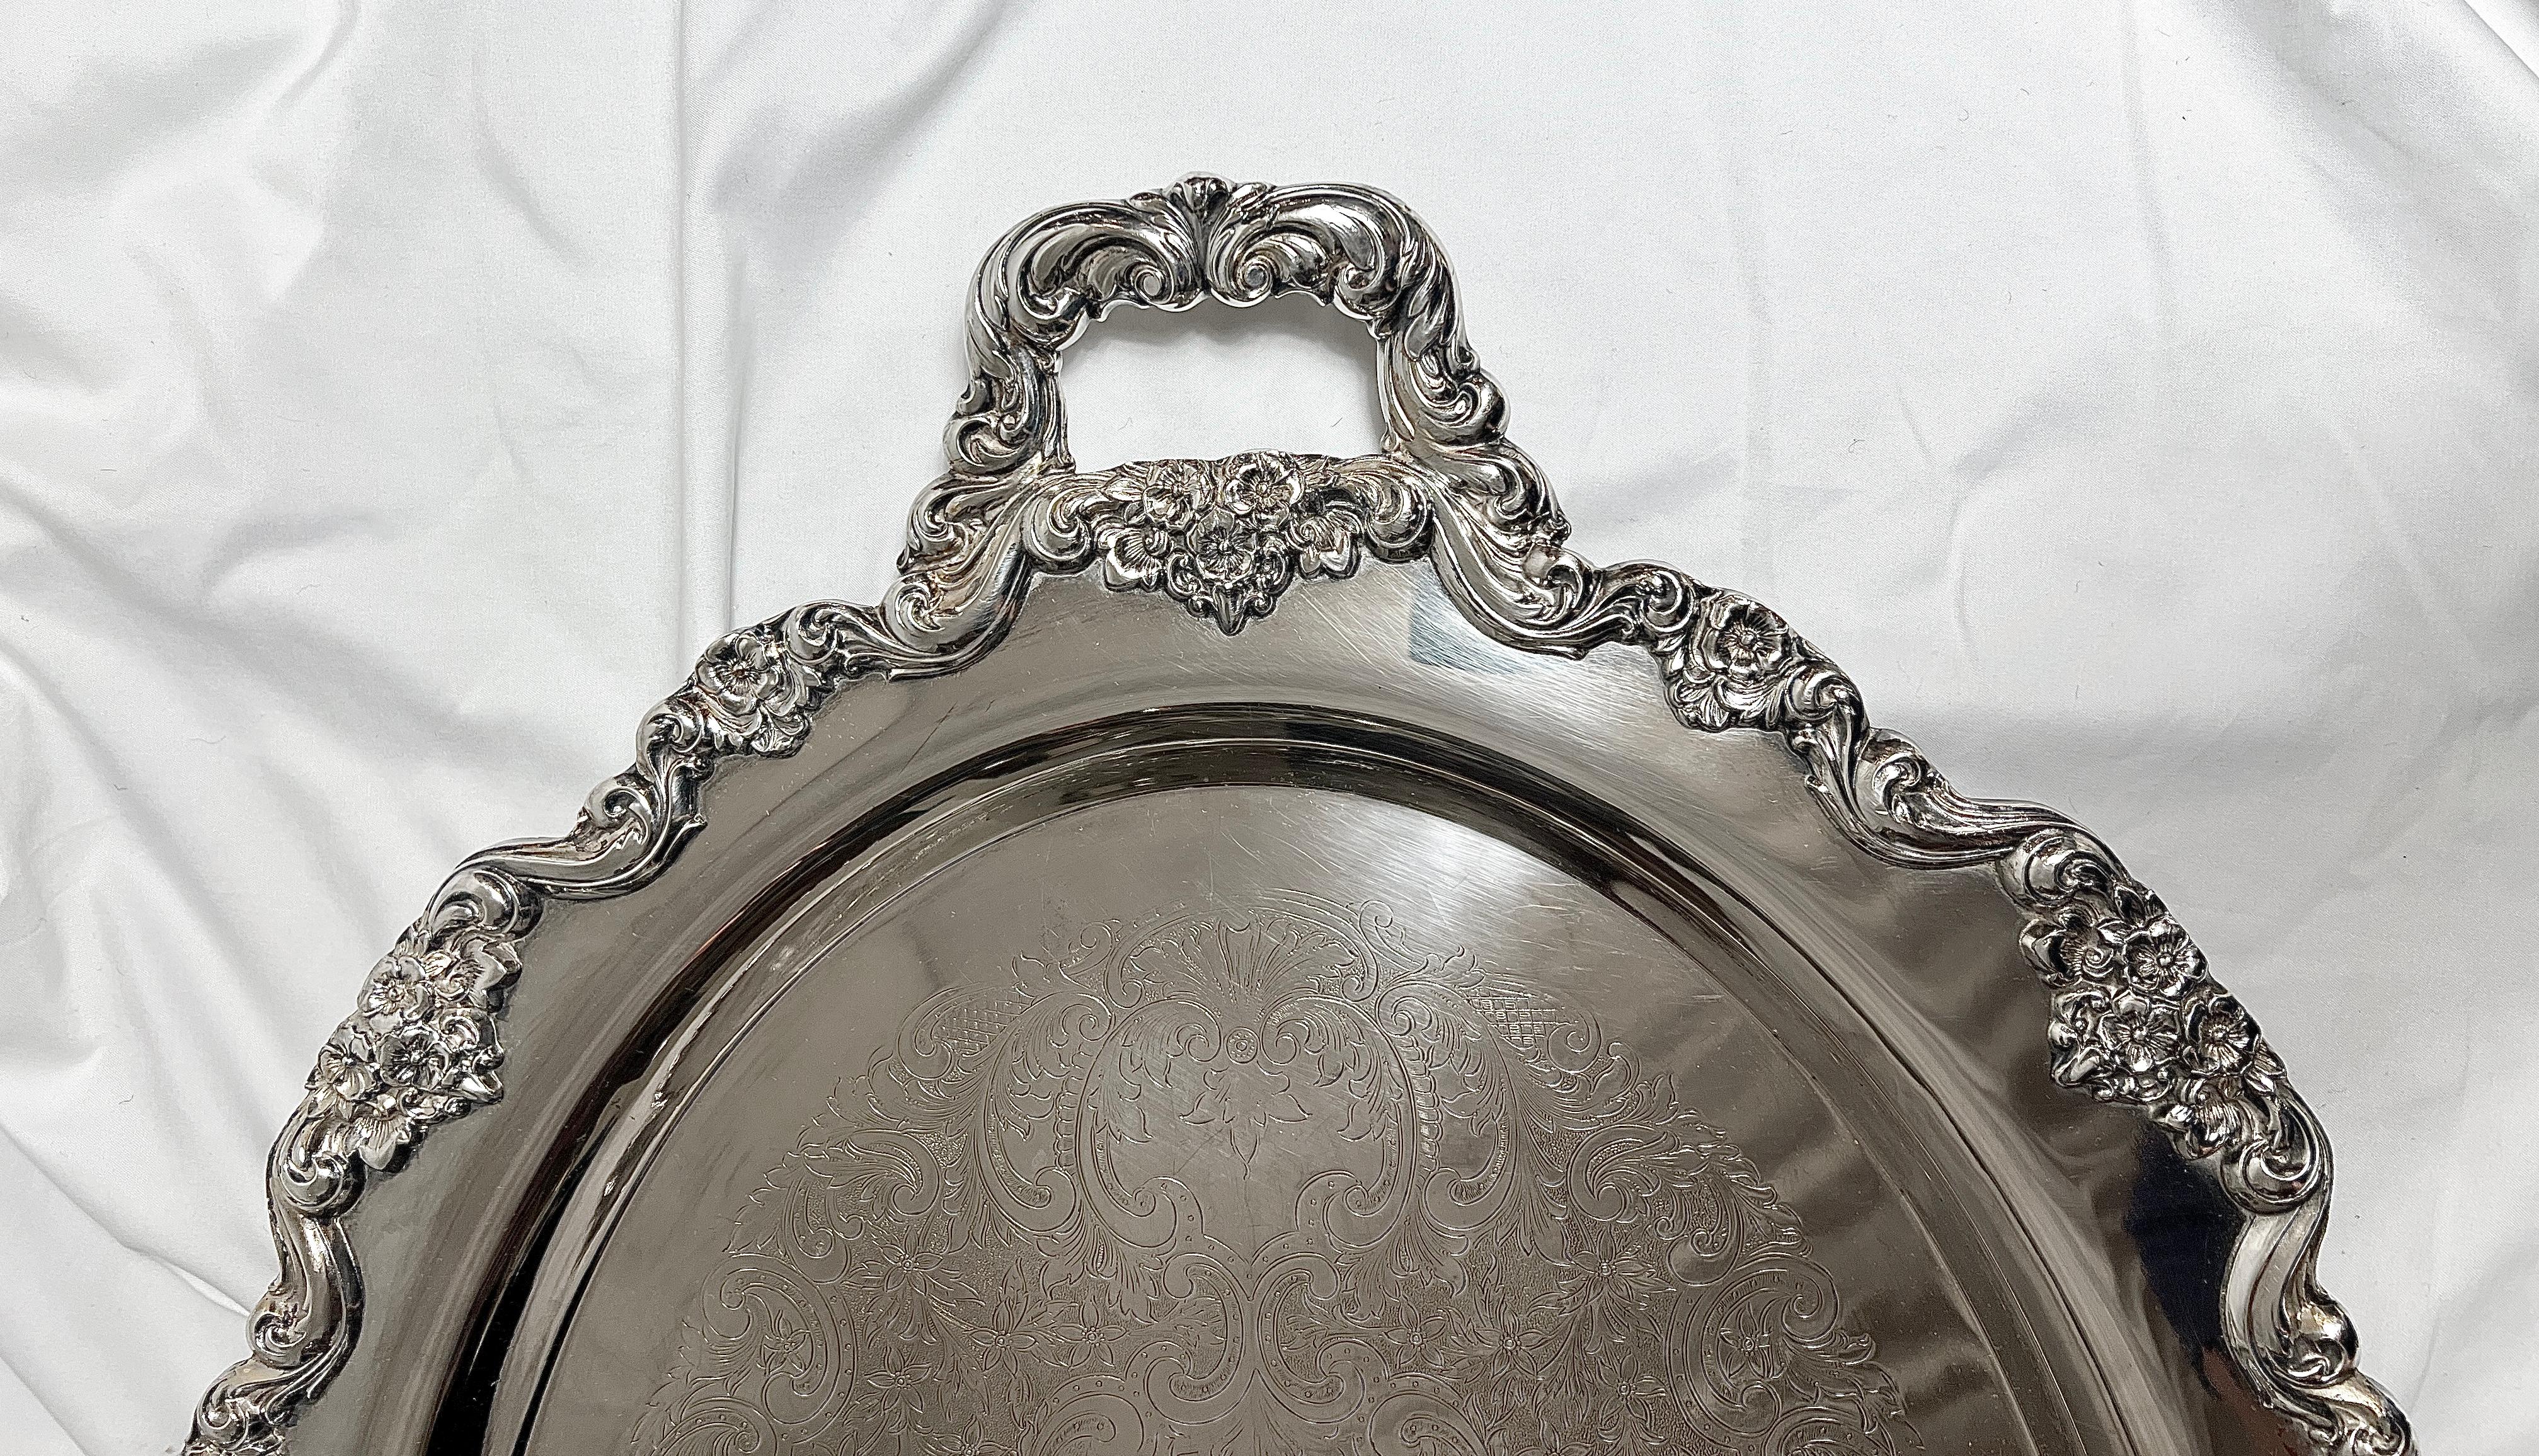 Antique English Sheffield Tray with Intricate Engraving and Rolled Edges, Circa 1890.
We have a similar tray to this one which is footed.  See Reference LU2854336786062 or SIL843